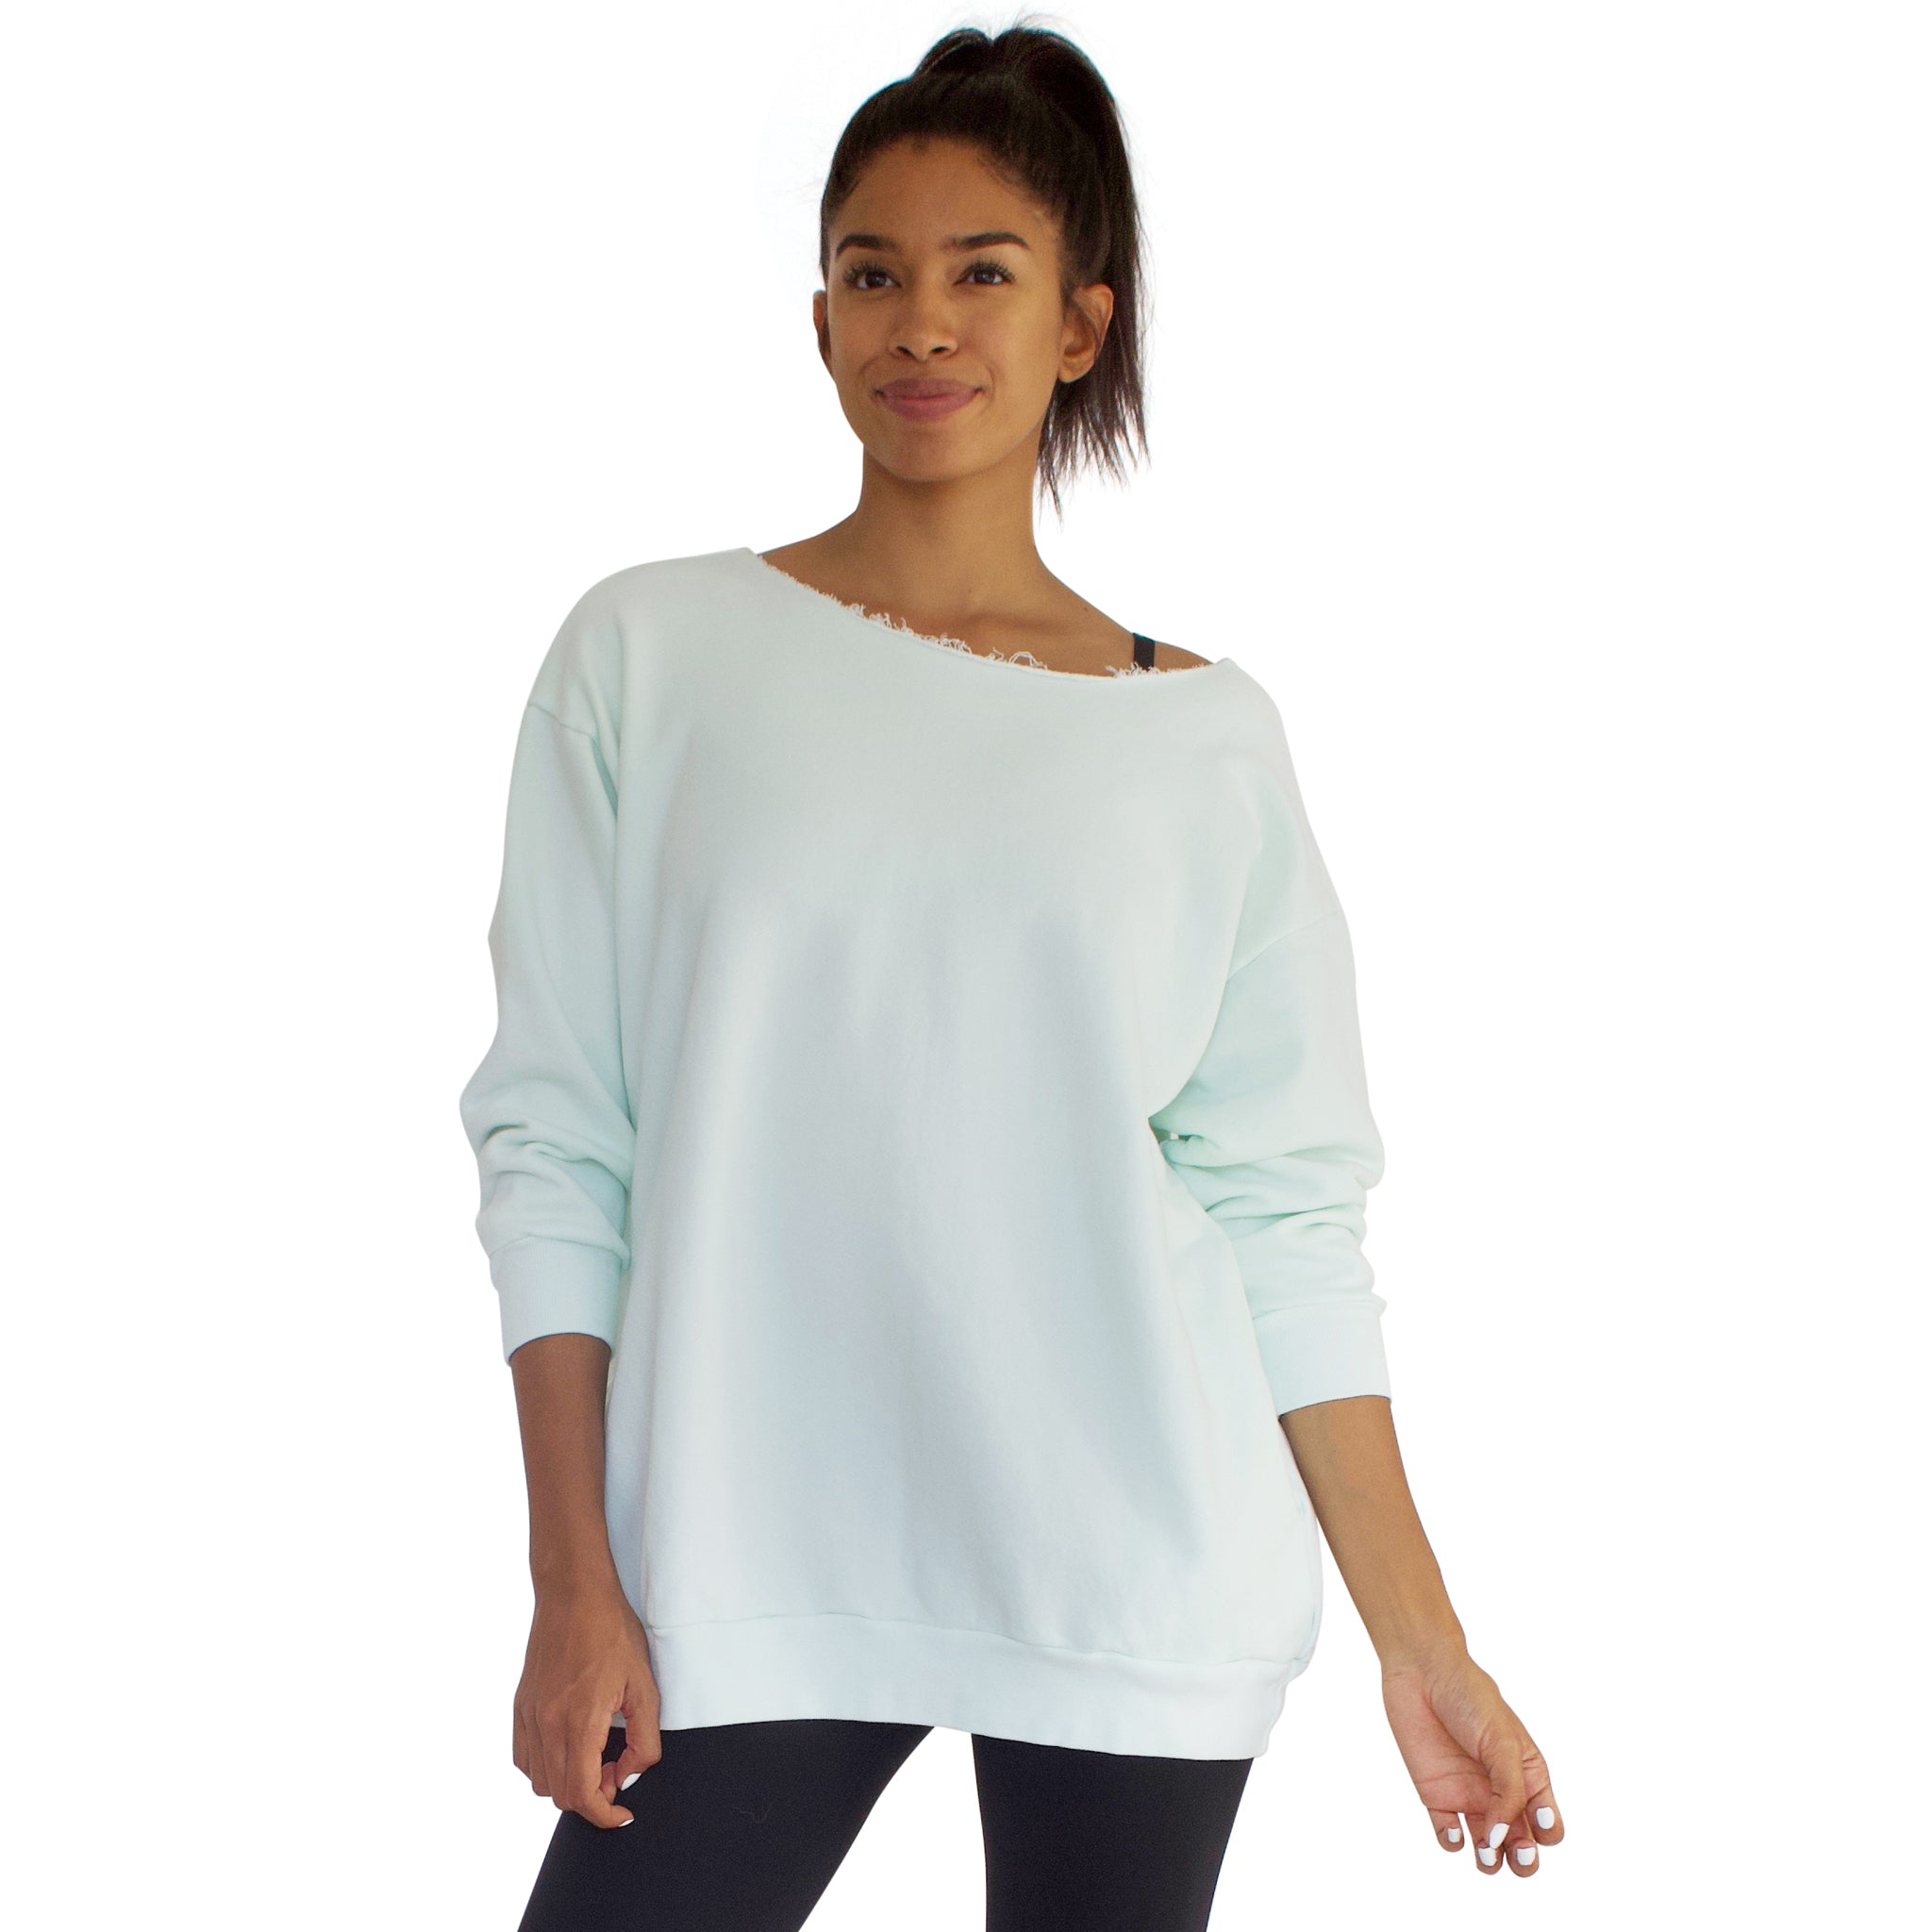 Our best selling oversized french terry top with raw edge neckline, side seam pockets shown here in Mint Green.